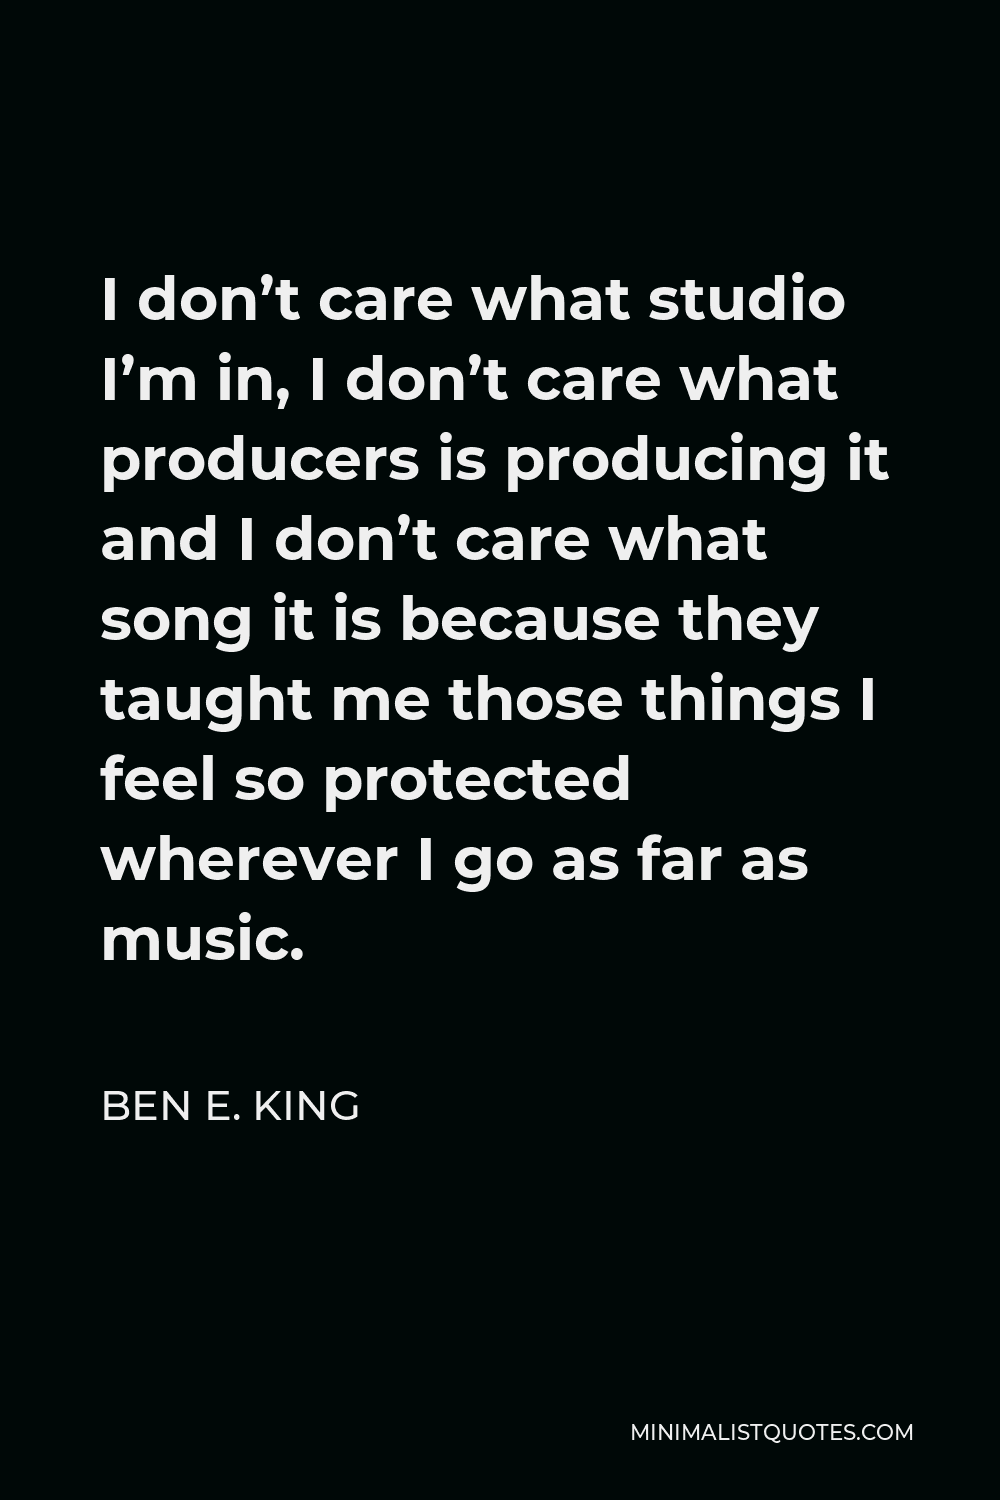 Ben E. King Quote - I don’t care what studio I’m in, I don’t care what producers is producing it and I don’t care what song it is because they taught me those things I feel so protected wherever I go as far as music.